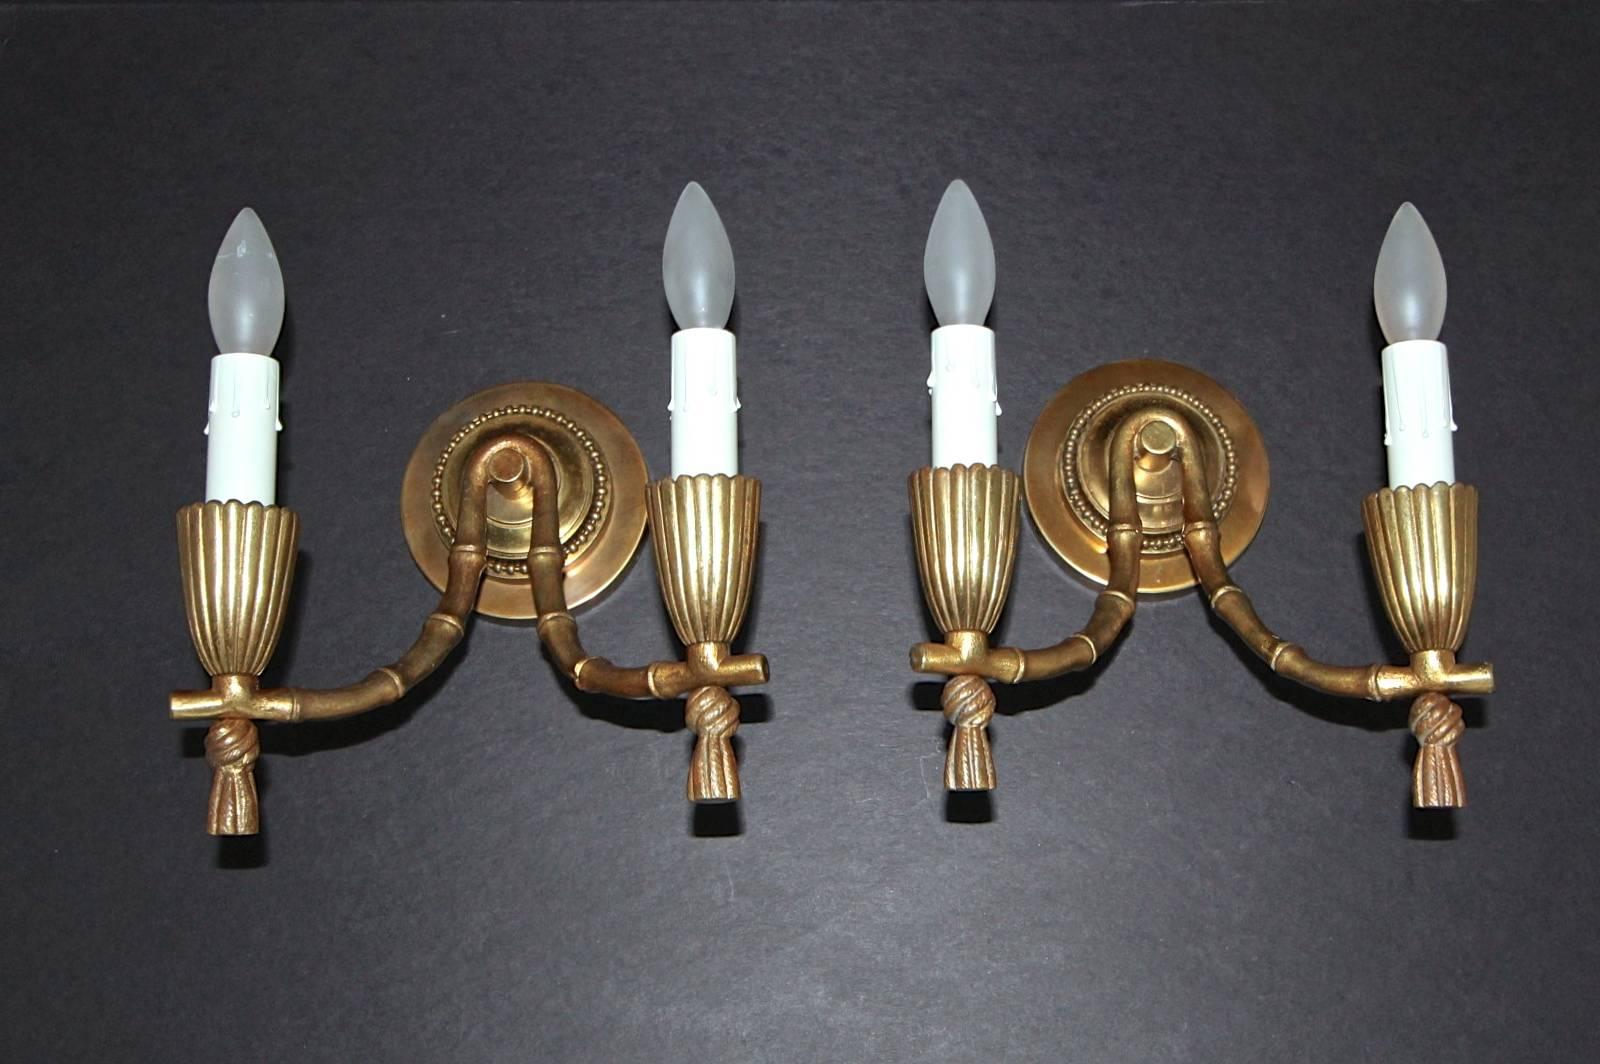 Pair of bronze faux bamboo two-light wall sconces attributed to Maison Baguès. Curved faux bamboo draped over a center rod with ribbed bobeche a tassel finials. Each sconces uses two candelabra base bulbs, newly wired.

A custom 4